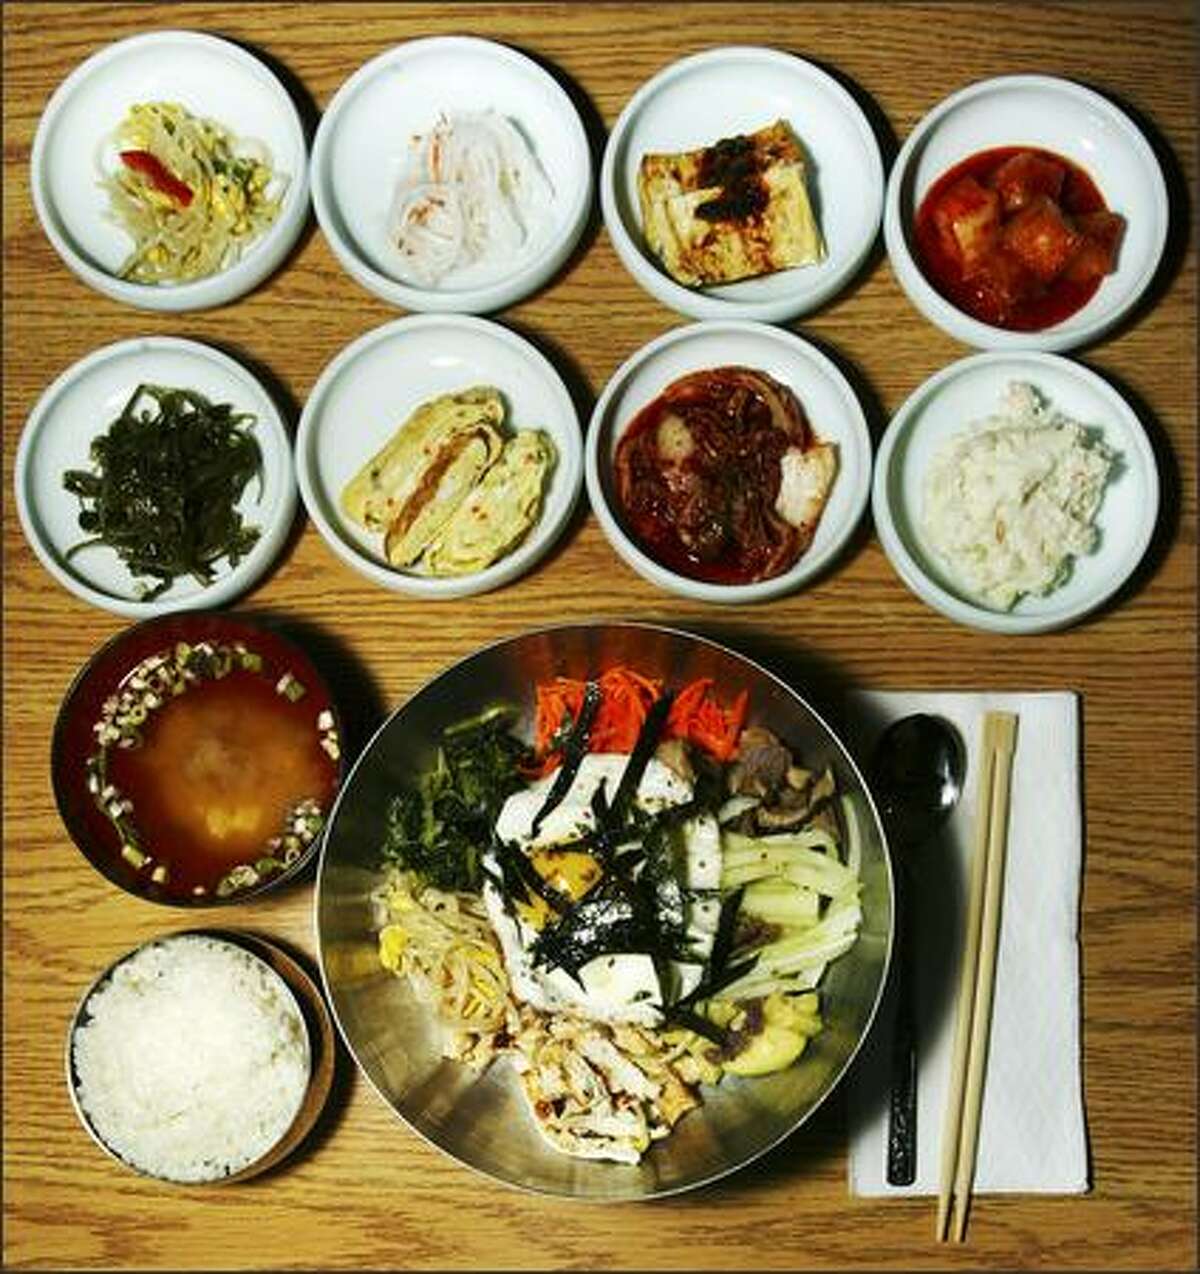 Four Seasons Korean Restaurant offerings include bibimbob, bottom, with julienne carrots, bean sprouts, beef, egg and rice, along with eight appetizers and a bowl of miso soup.